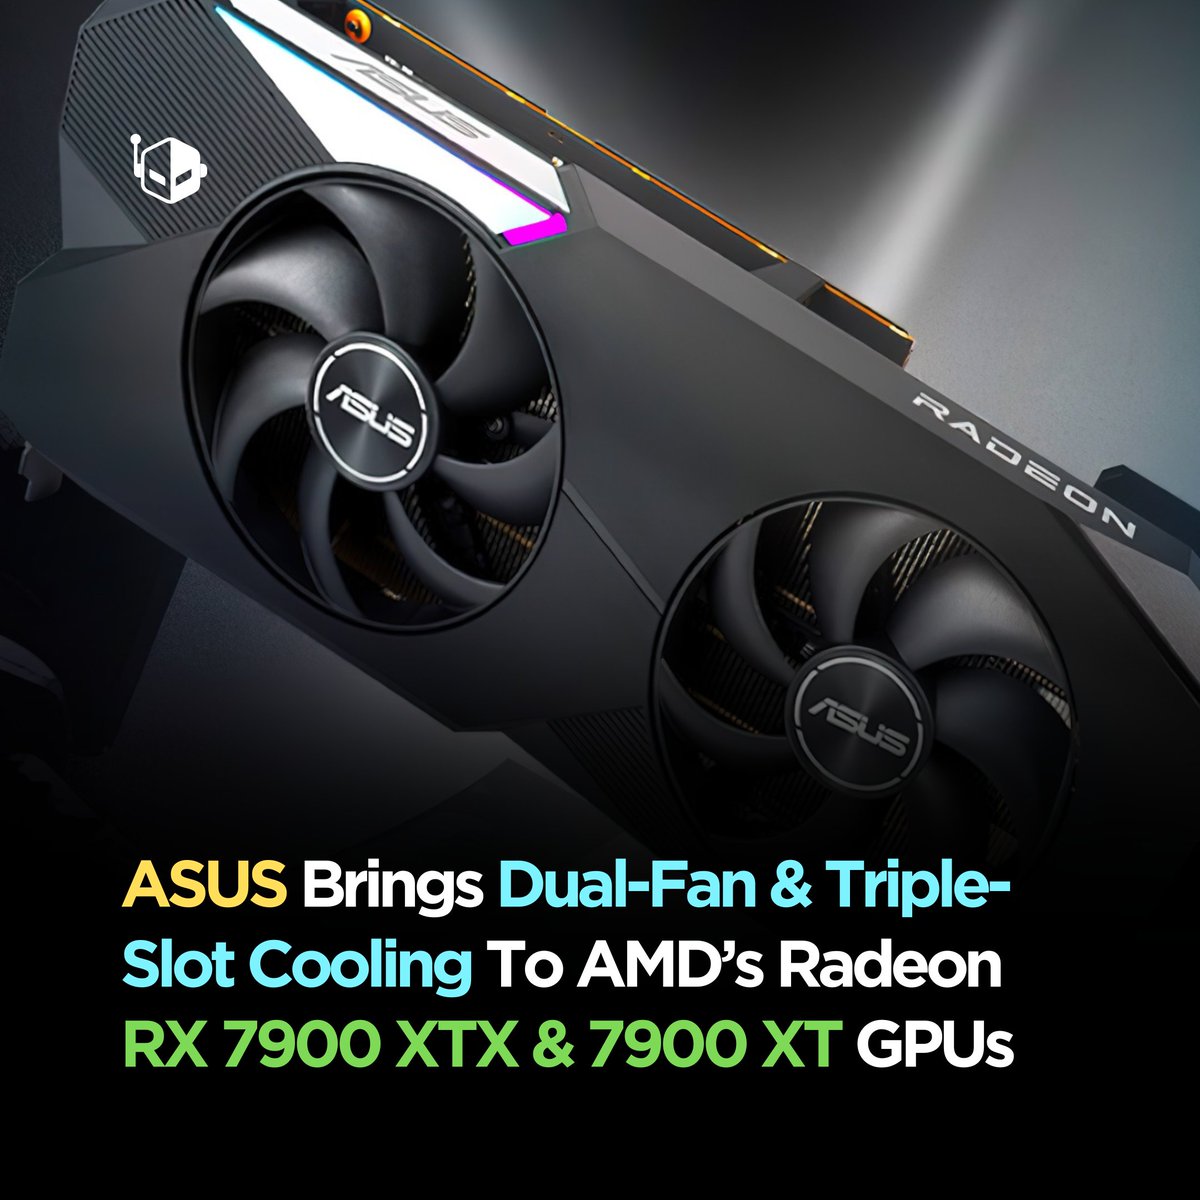 ASUS has launched the first dual-fan variants of the AMD Radeon RX 7900 XTX & RX 7900 XT GPUs, featuring overclocked specs out of the box. wccftech.com/asus-brings-du…